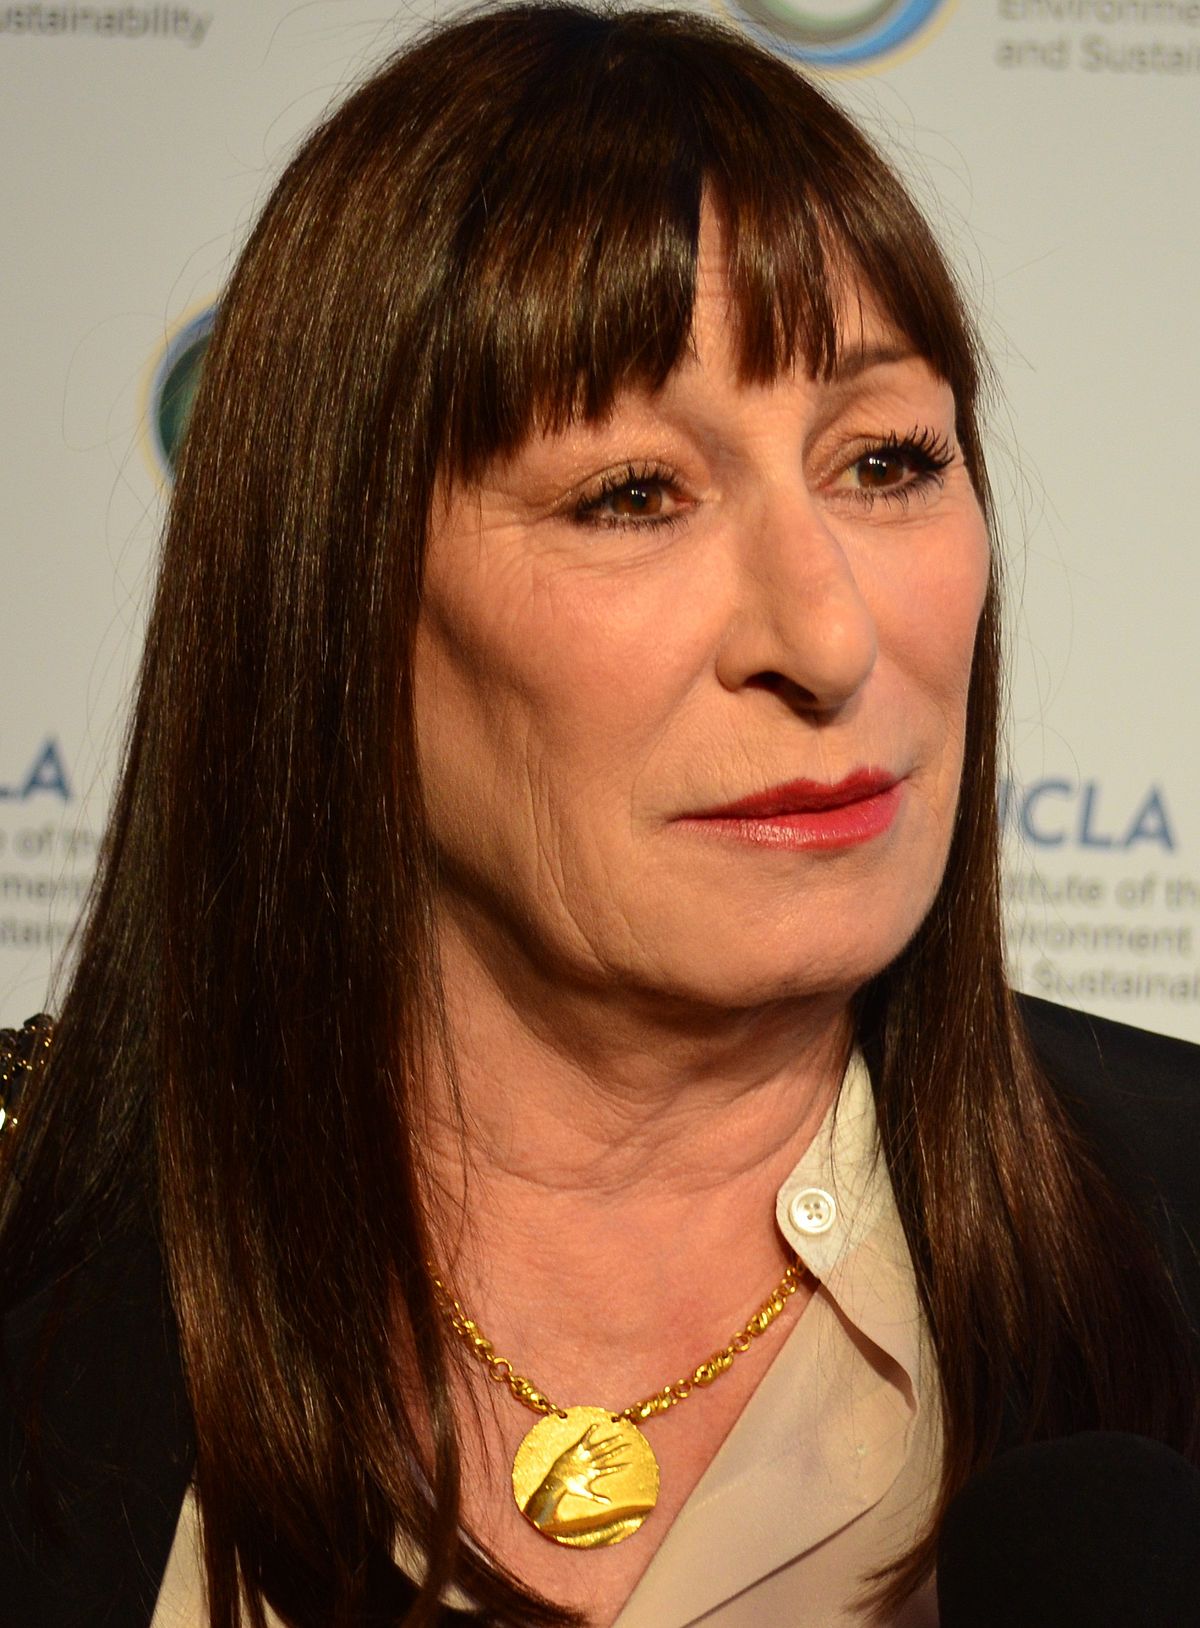 Anjelica is time standing still